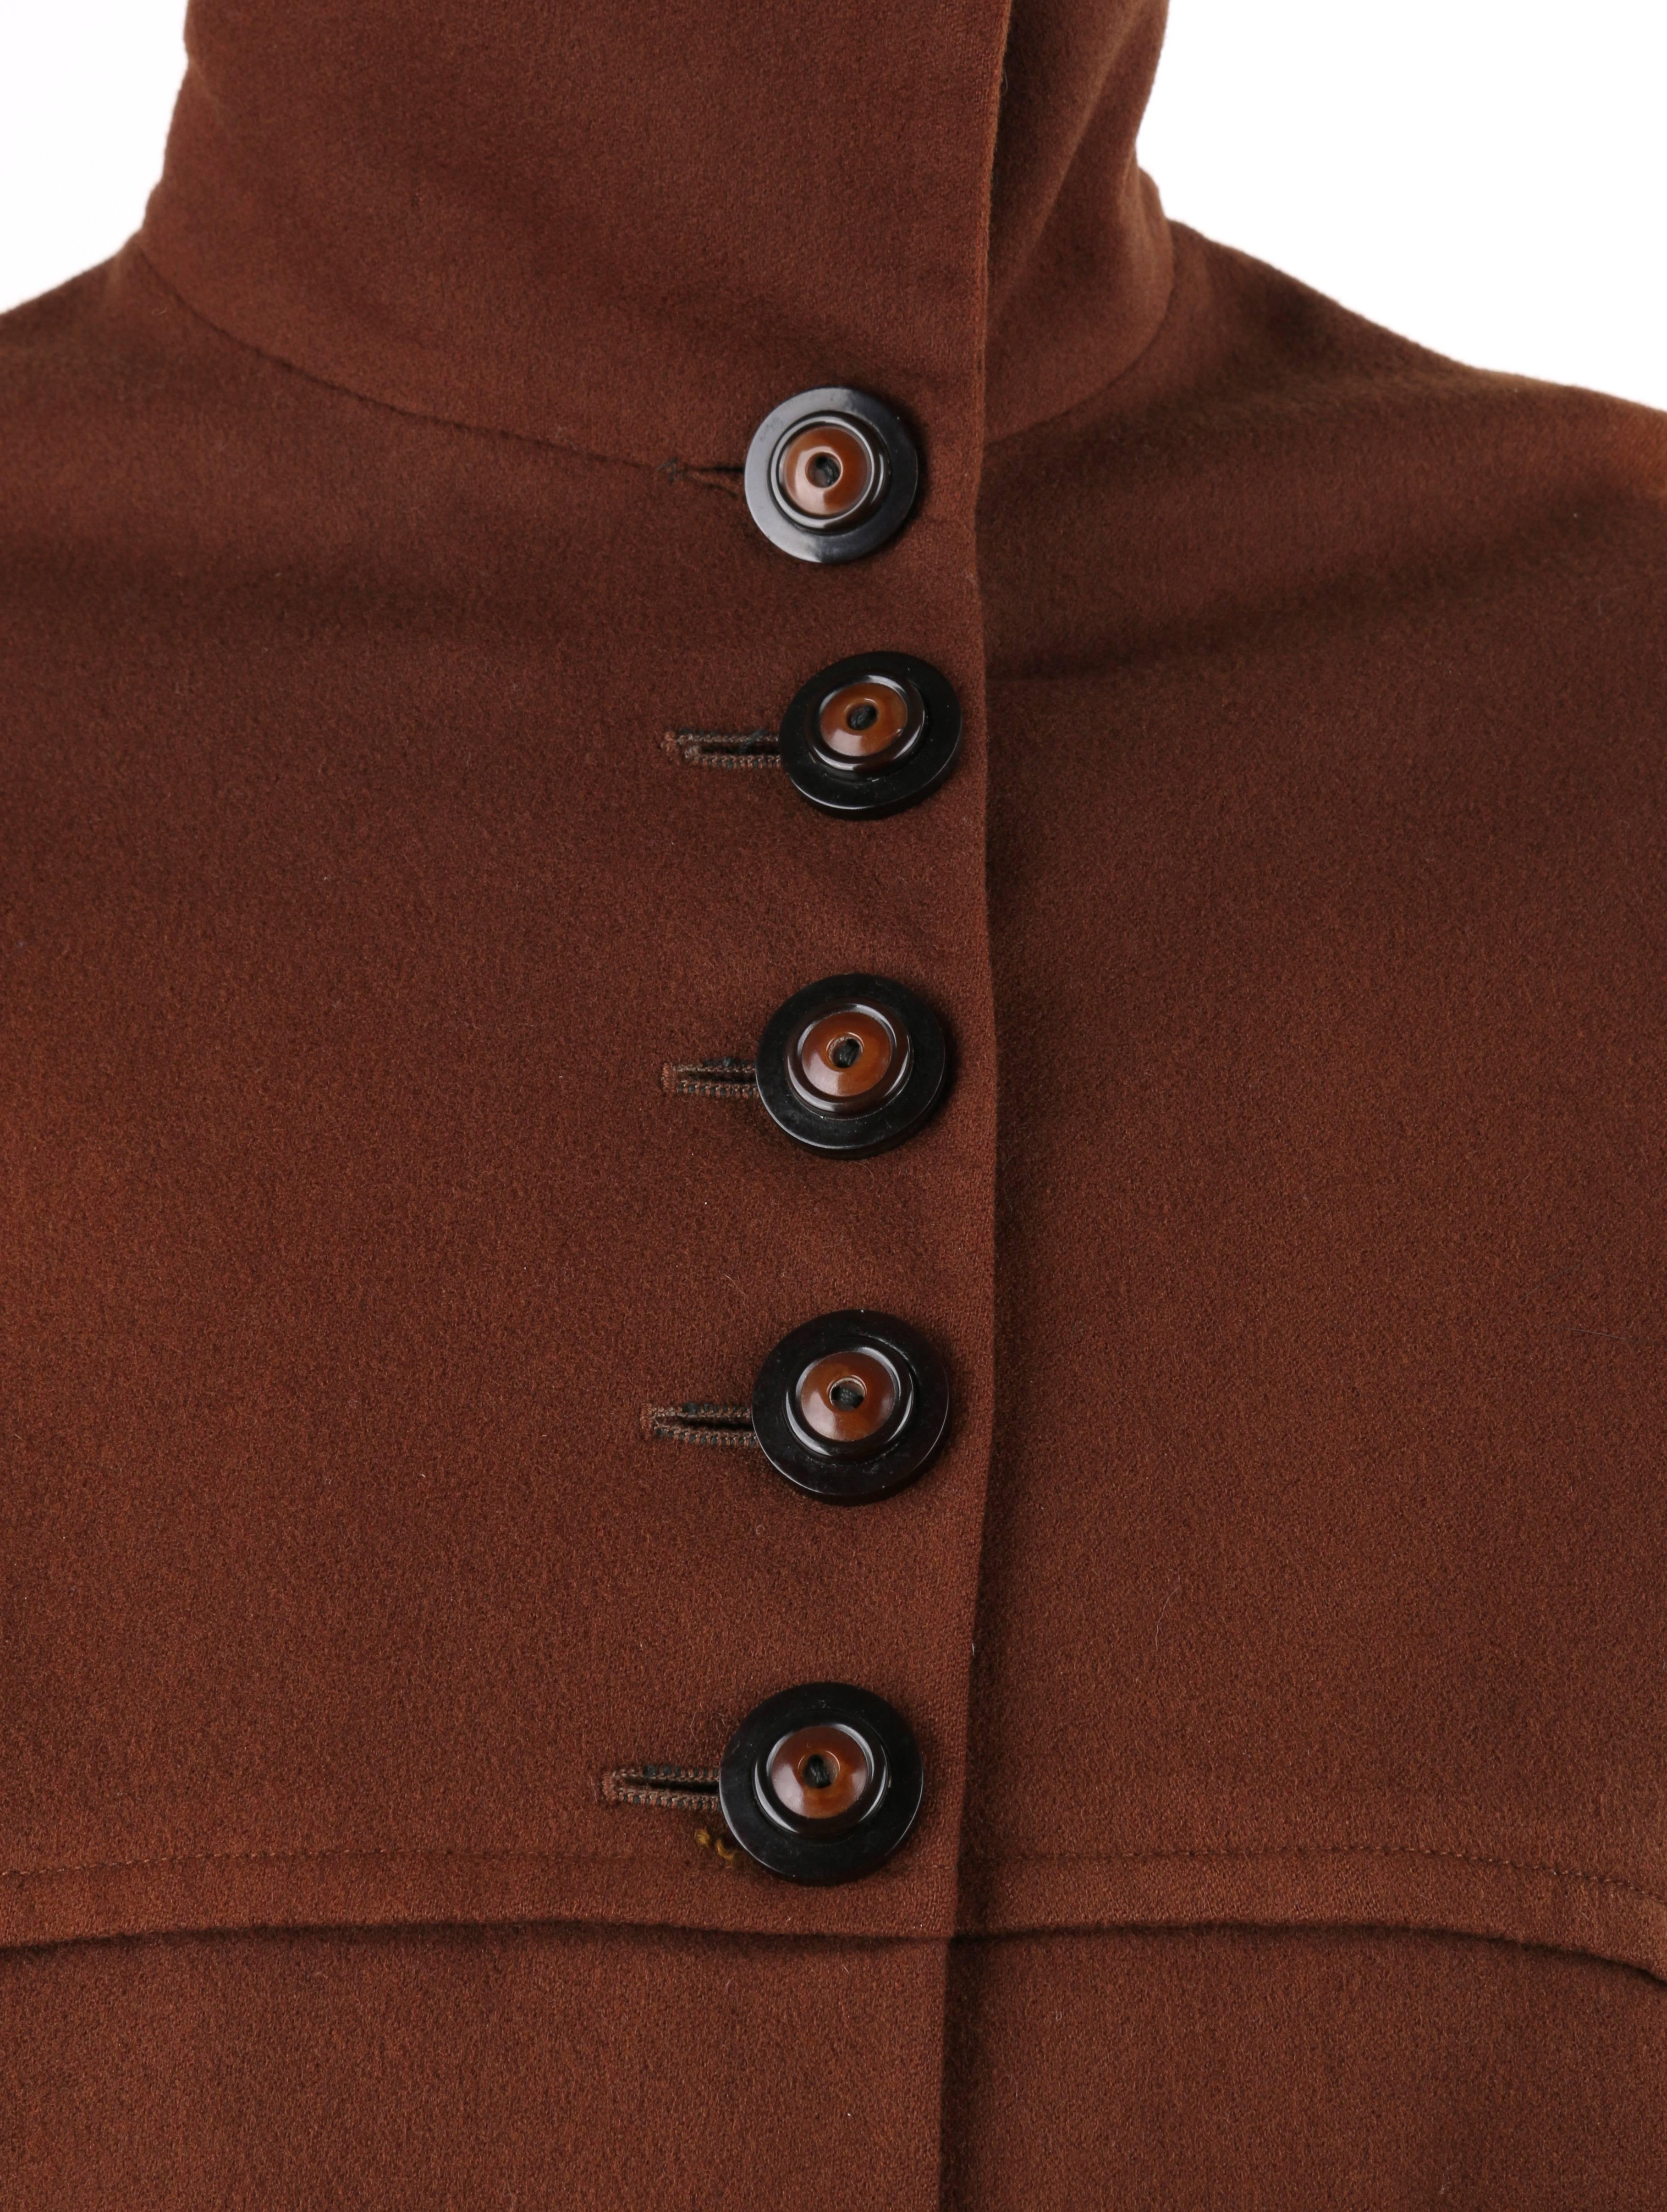 COUTURE c.1910's Edwardian WWI Brown Wool Belted Military Belted Walking Coat 1